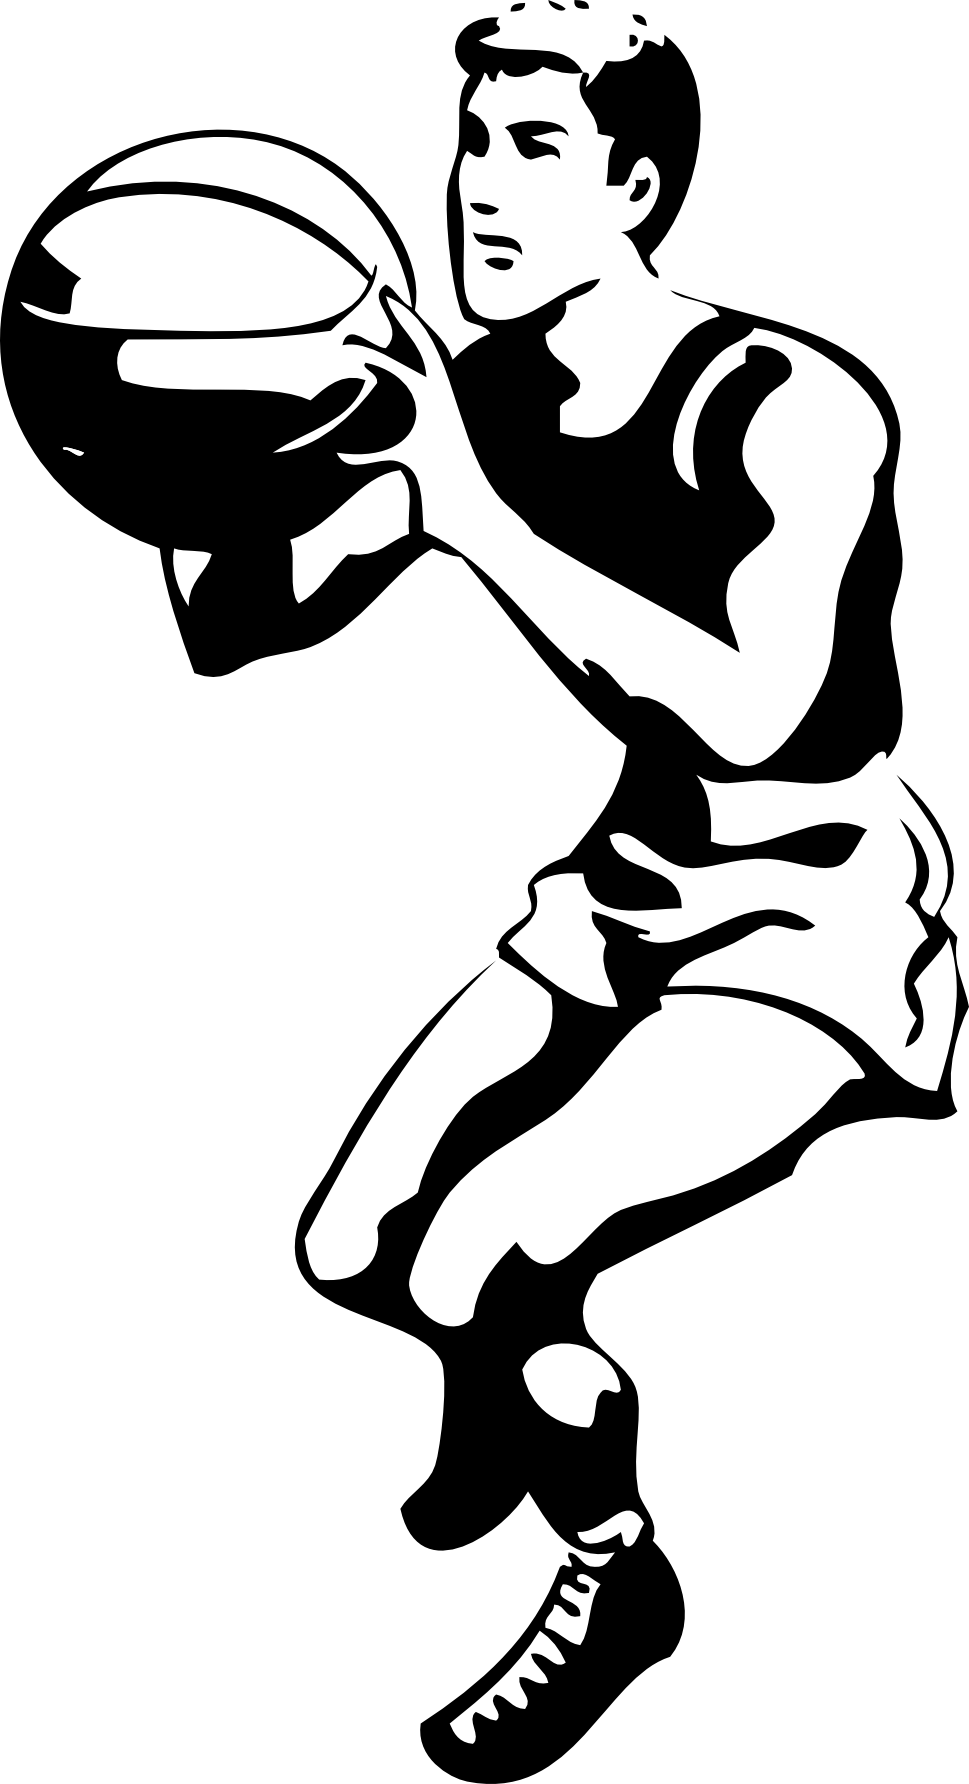 Black And White Images Basketball - Clipart library